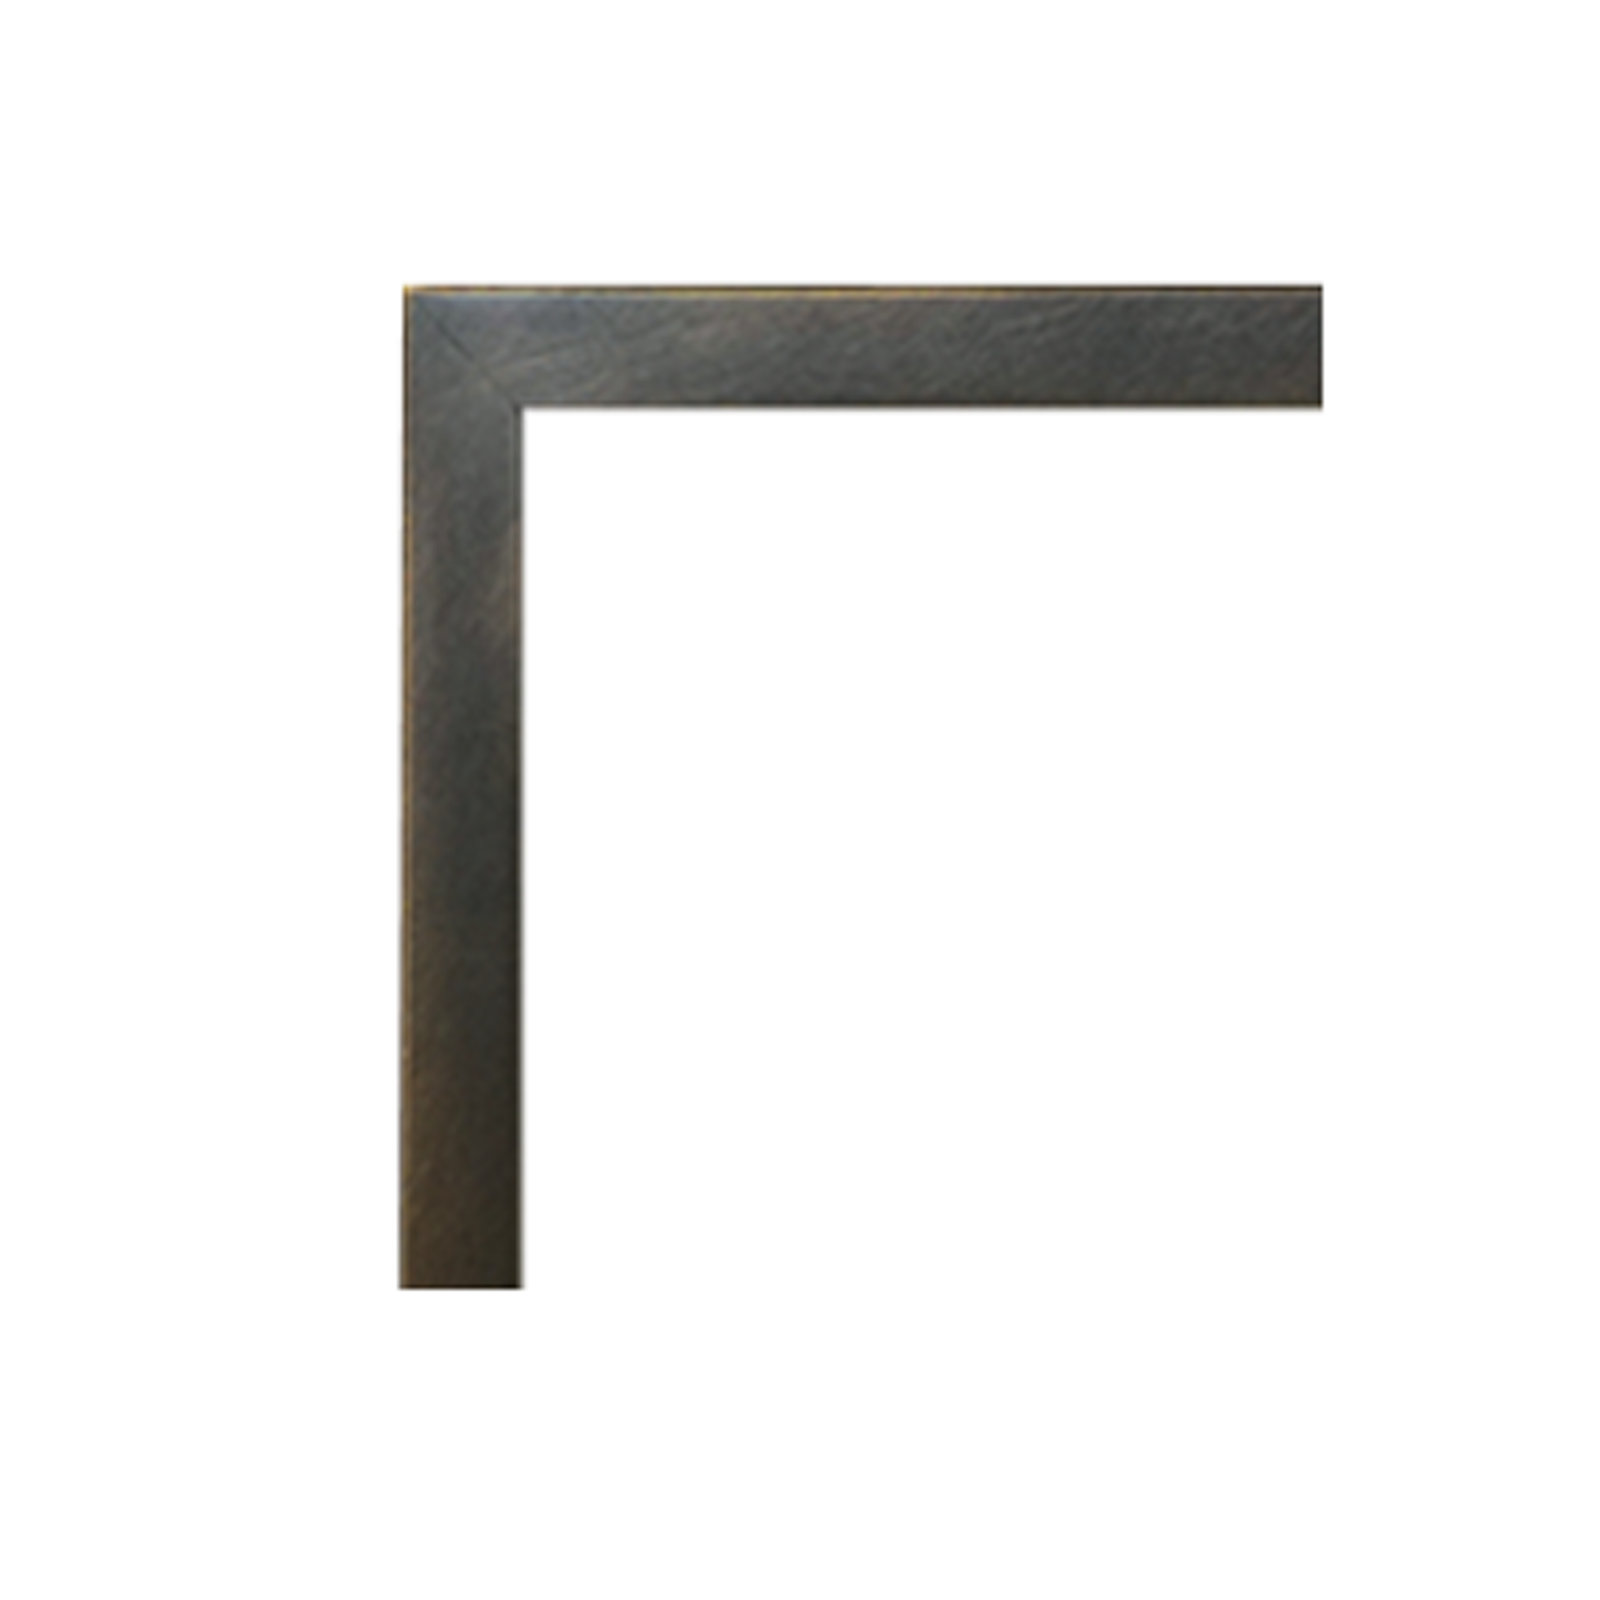 Empire 1.5-in. Oil-Rubbed Bronze Beveled Frame - DF482LBZT